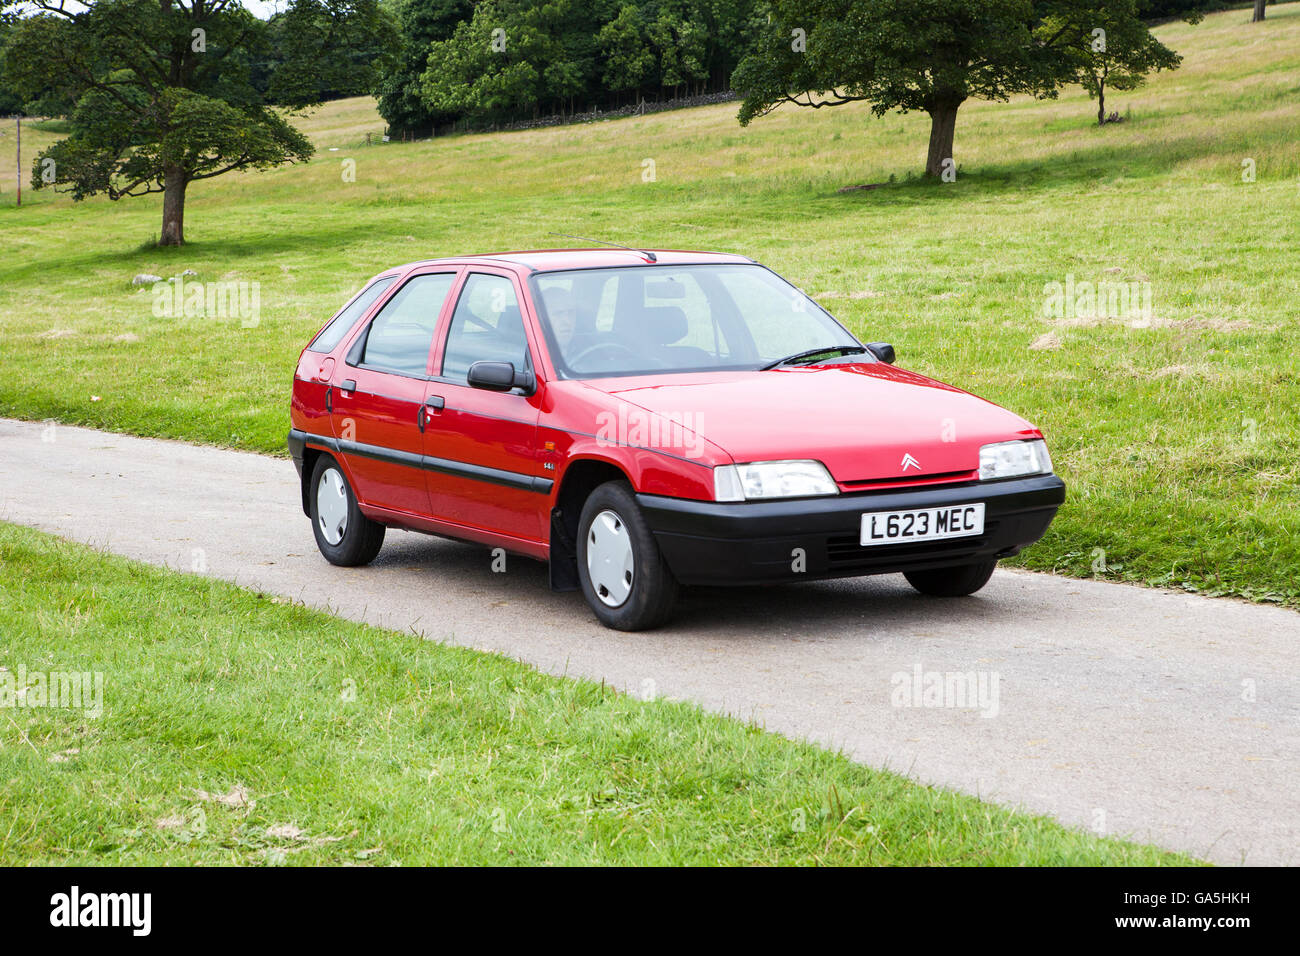 Citroen ZX at Leighton Hall Classic Car Rally, Carnforth, Lancashire, UK.  3rd July, 2016.  The annual classic car rally takes place at the magnificent Leighton Hall in Carnforth in Lancashire.  British classic sports cars ranging from MG's to American muscle cars like the Dodge Vipers & Ford Mustangs.  The spectator event drew thousands of visitors to this scenic part of the country on the north west coast of England.  Credit:  Cernan Elias/Alamy Live News Stock Photo